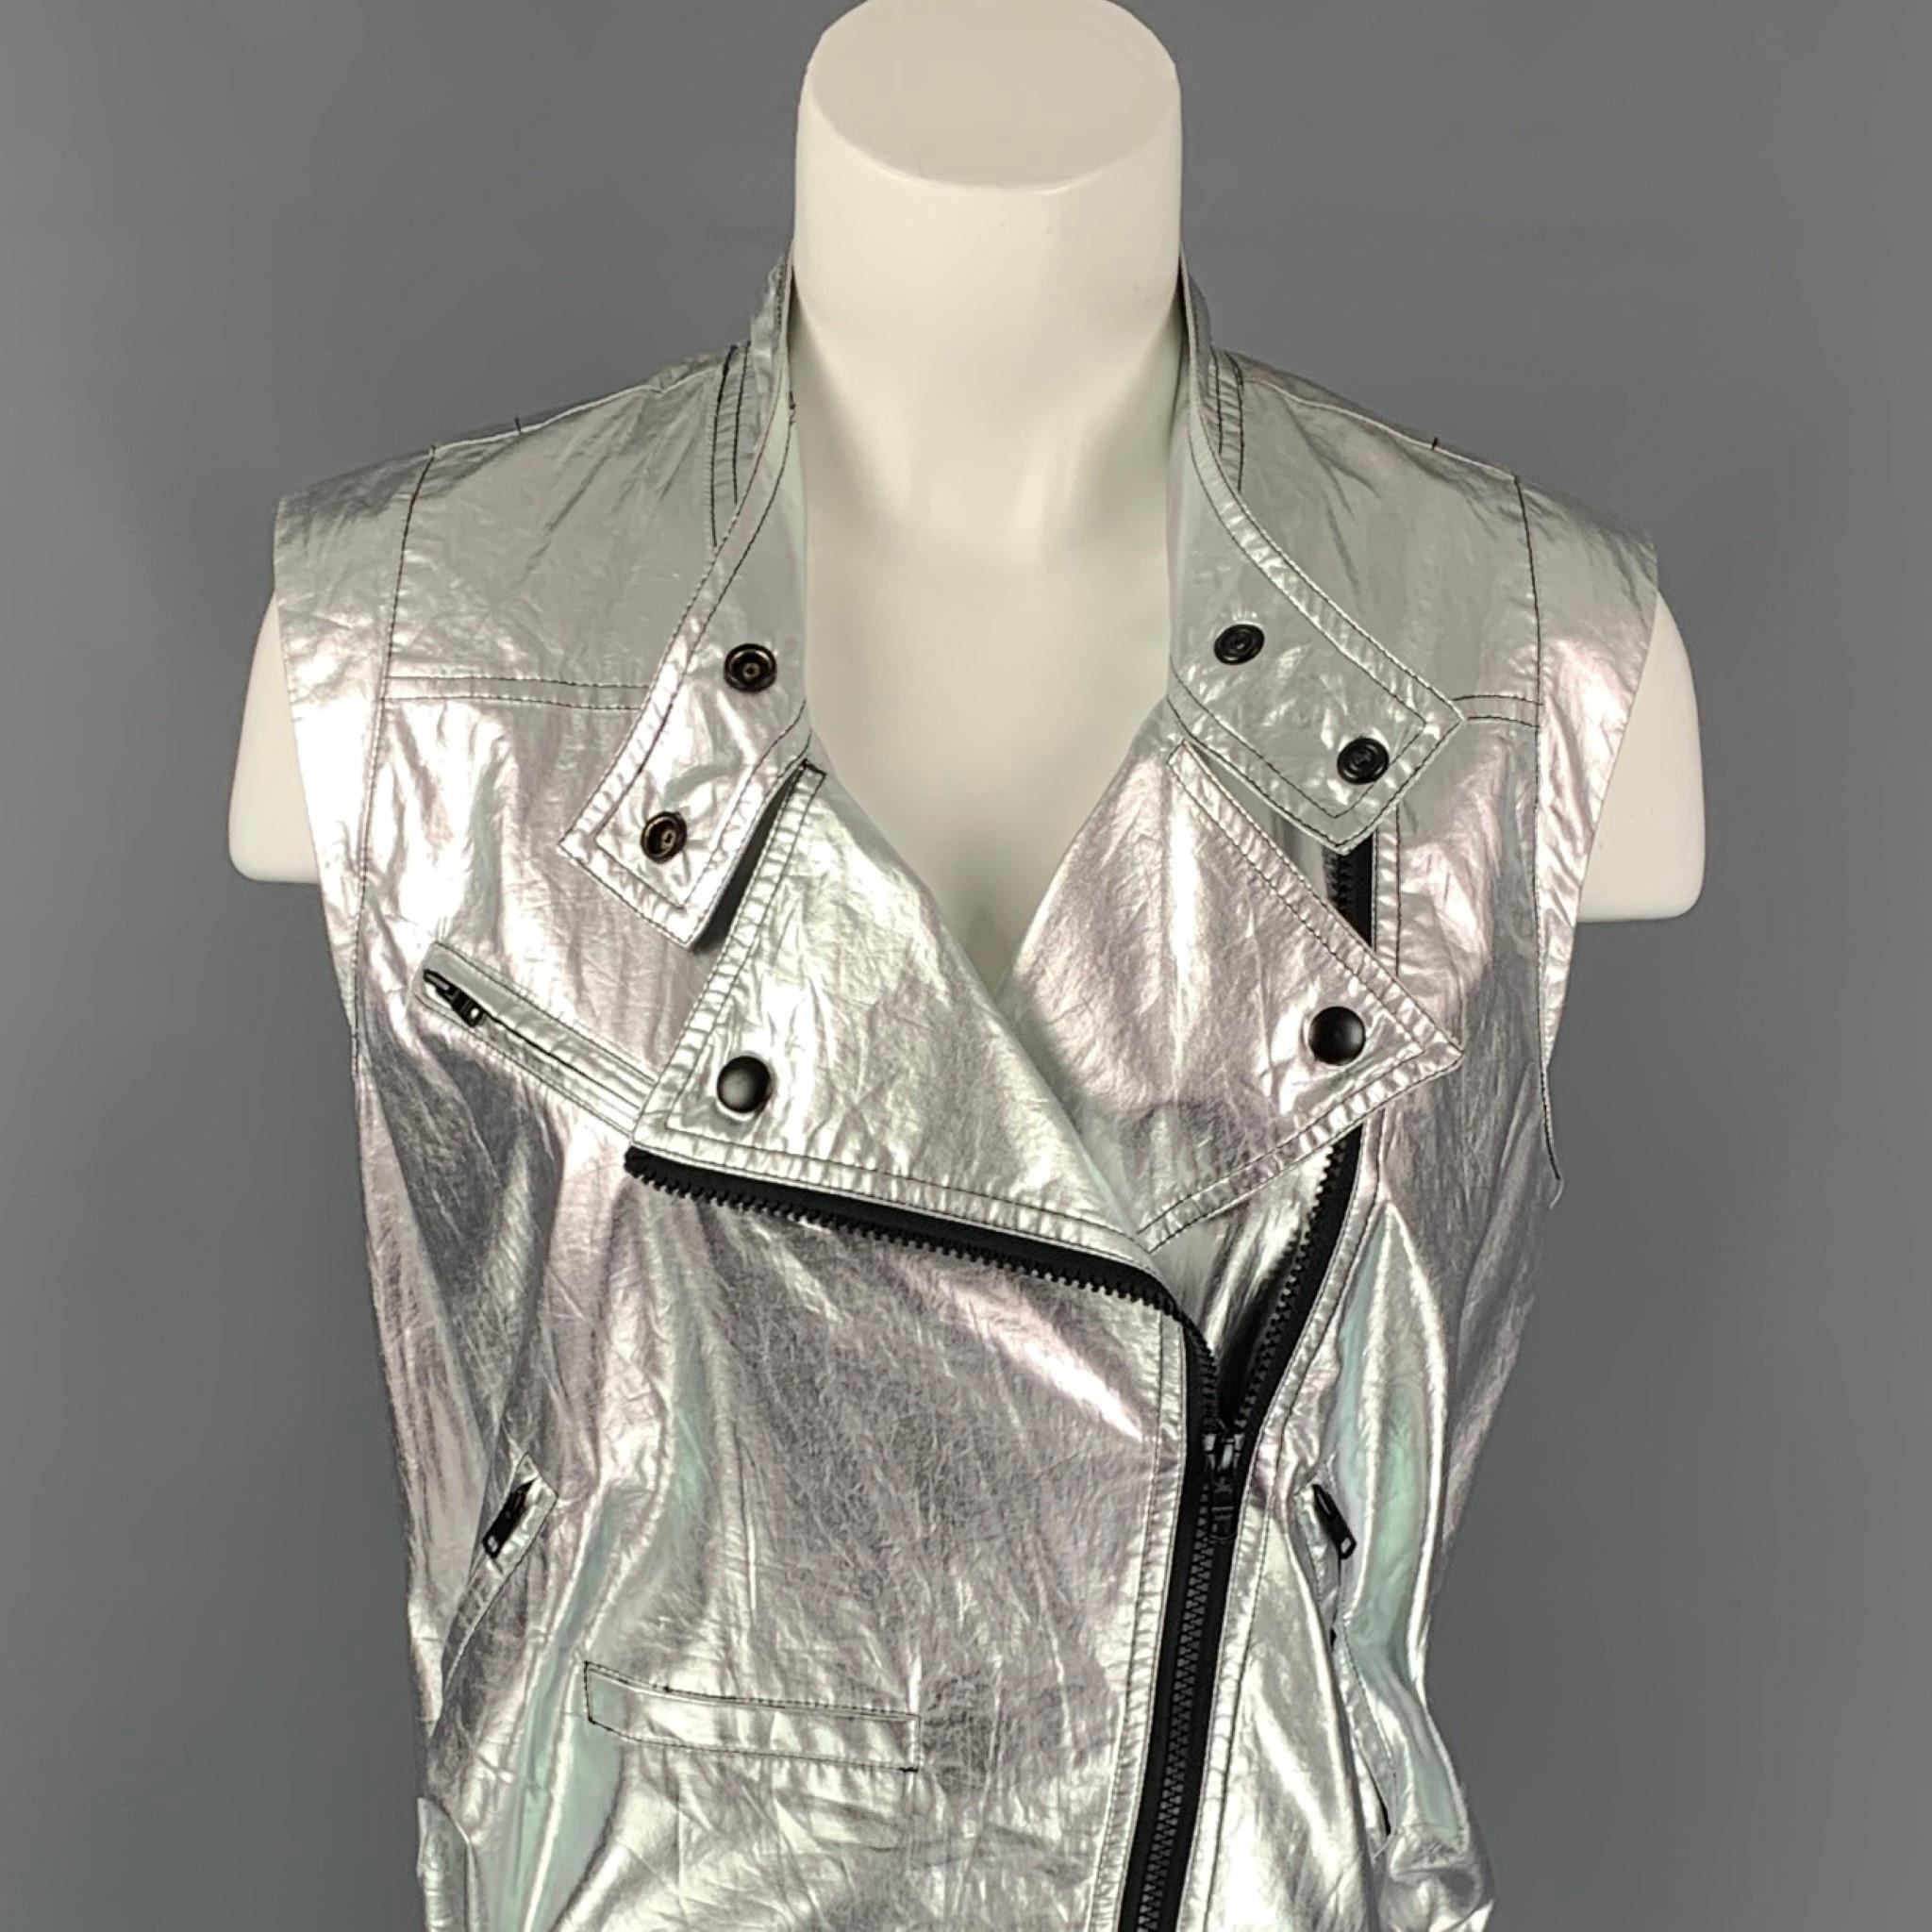 REBECCA MINKOFF vest comes in a silver & black metallic cotton featuring a biker style, top stitching, zipper pockets, belted straps, and a full zip up closure. 

Very Good Pre-Owned Condition.
Marked: XS

Measurements:

Shoulder: 16 in.
Bust: 36